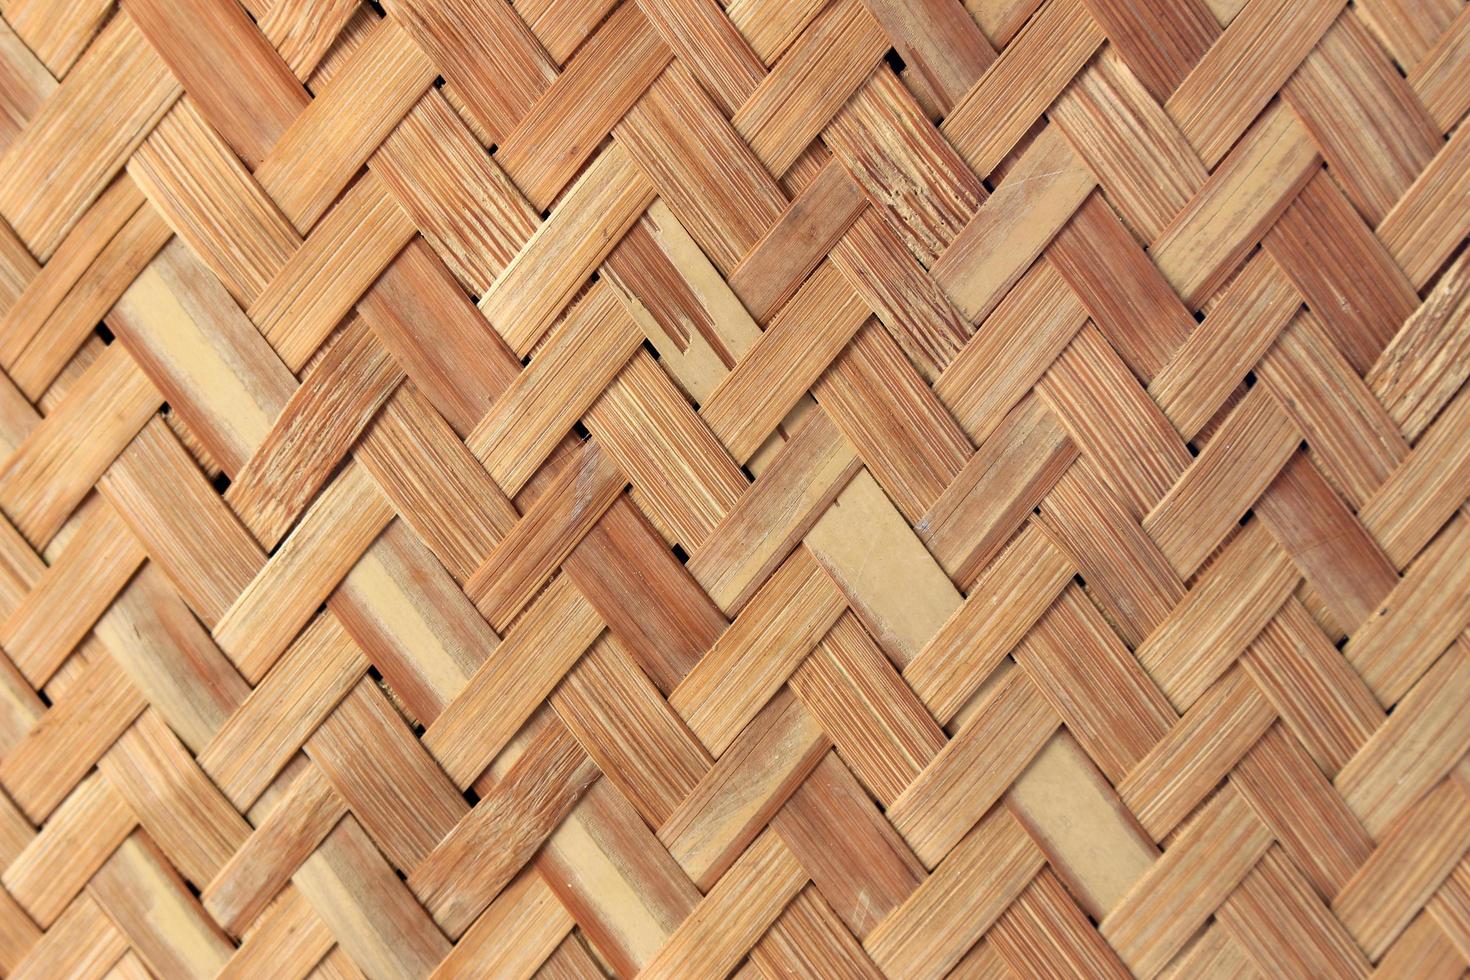 Handcraft bamboo weave texture and background photo